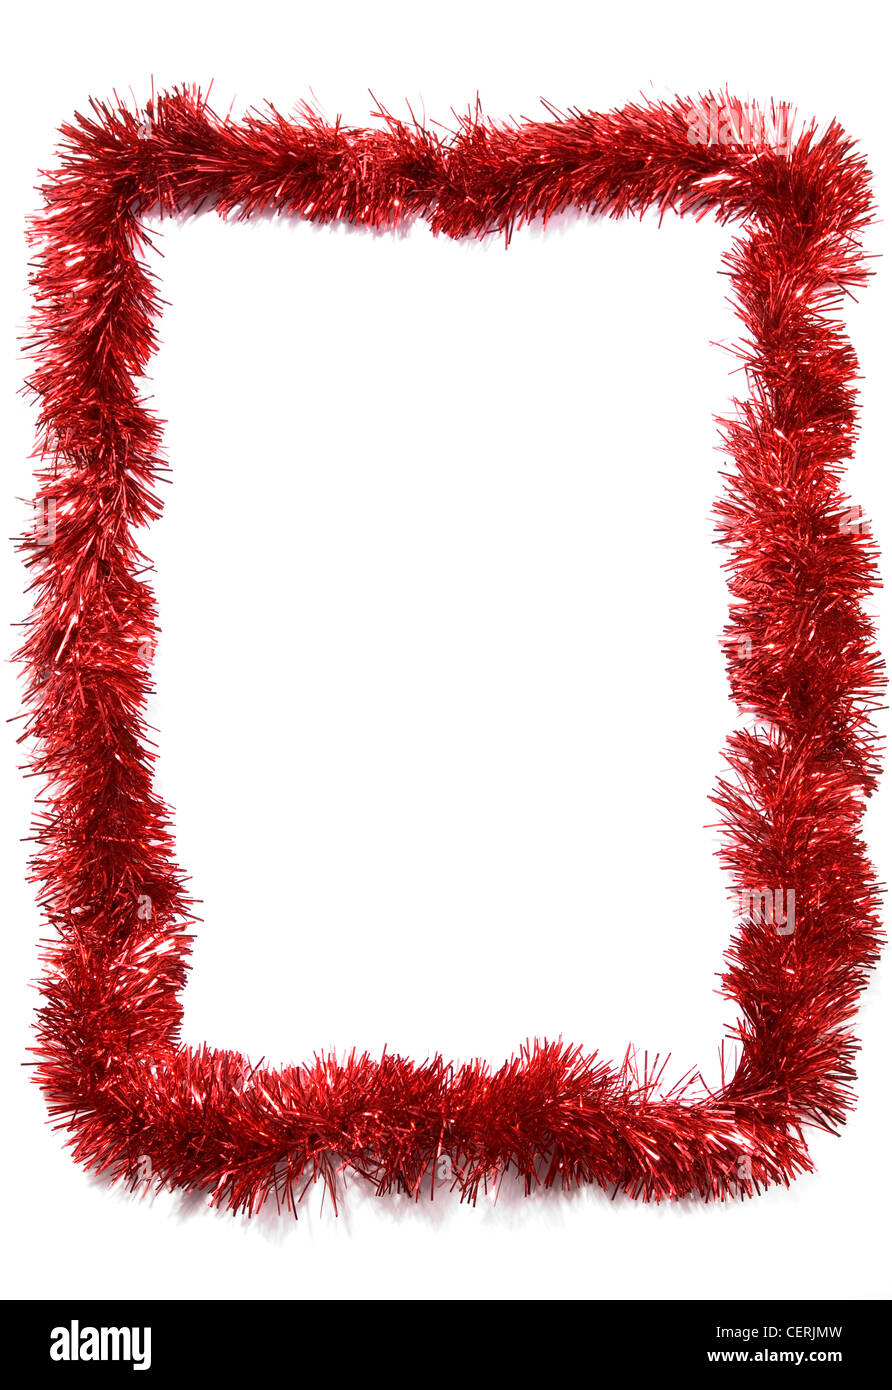 Red tinsel in oblong frame shape Stock Photo